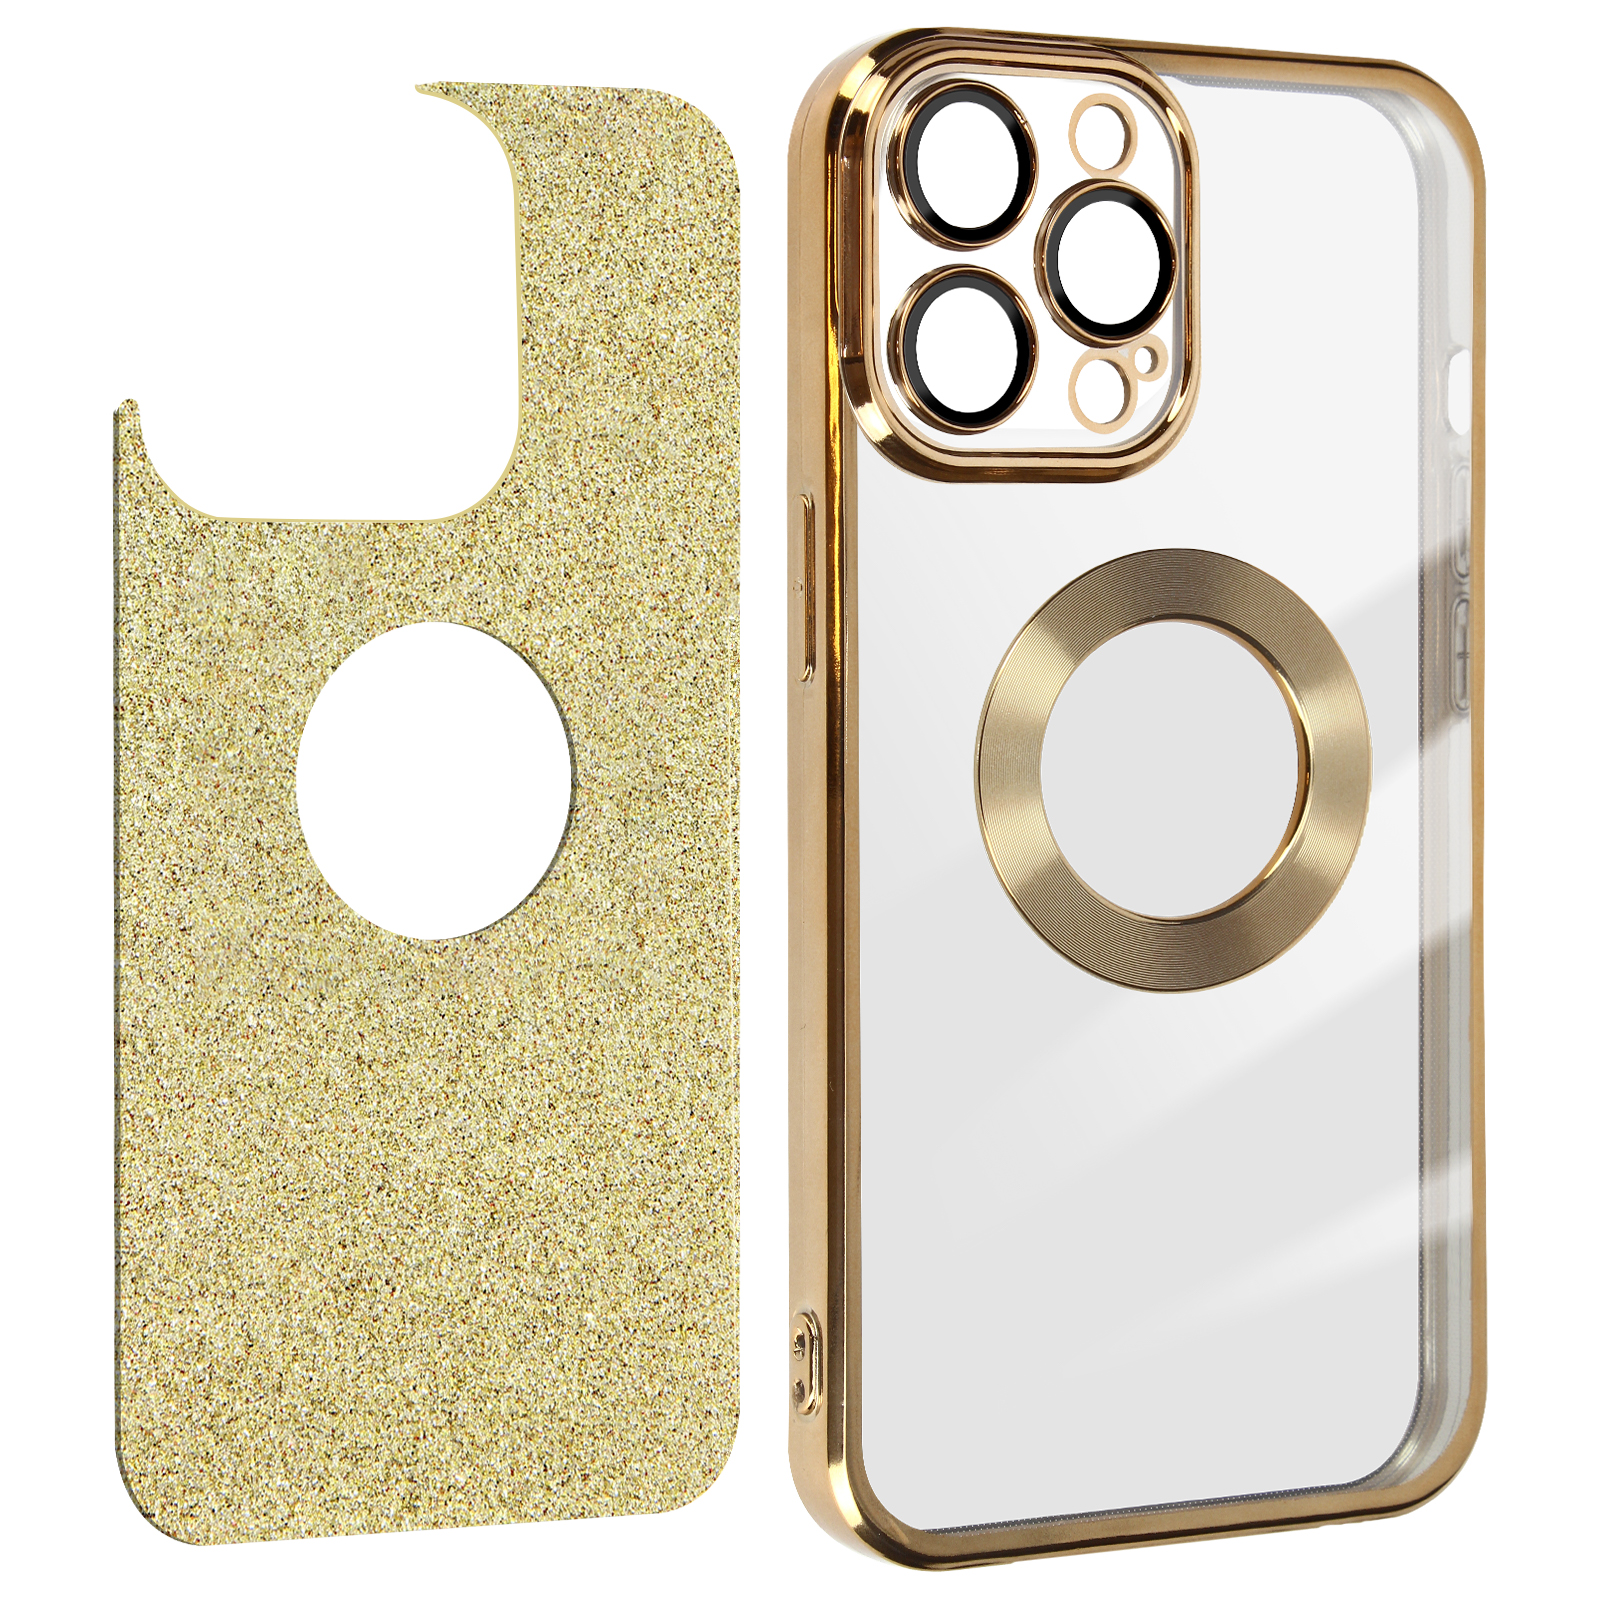 Backcover, Spark Apple, Series, Protecam Pro, iPhone 12 Gold AVIZAR